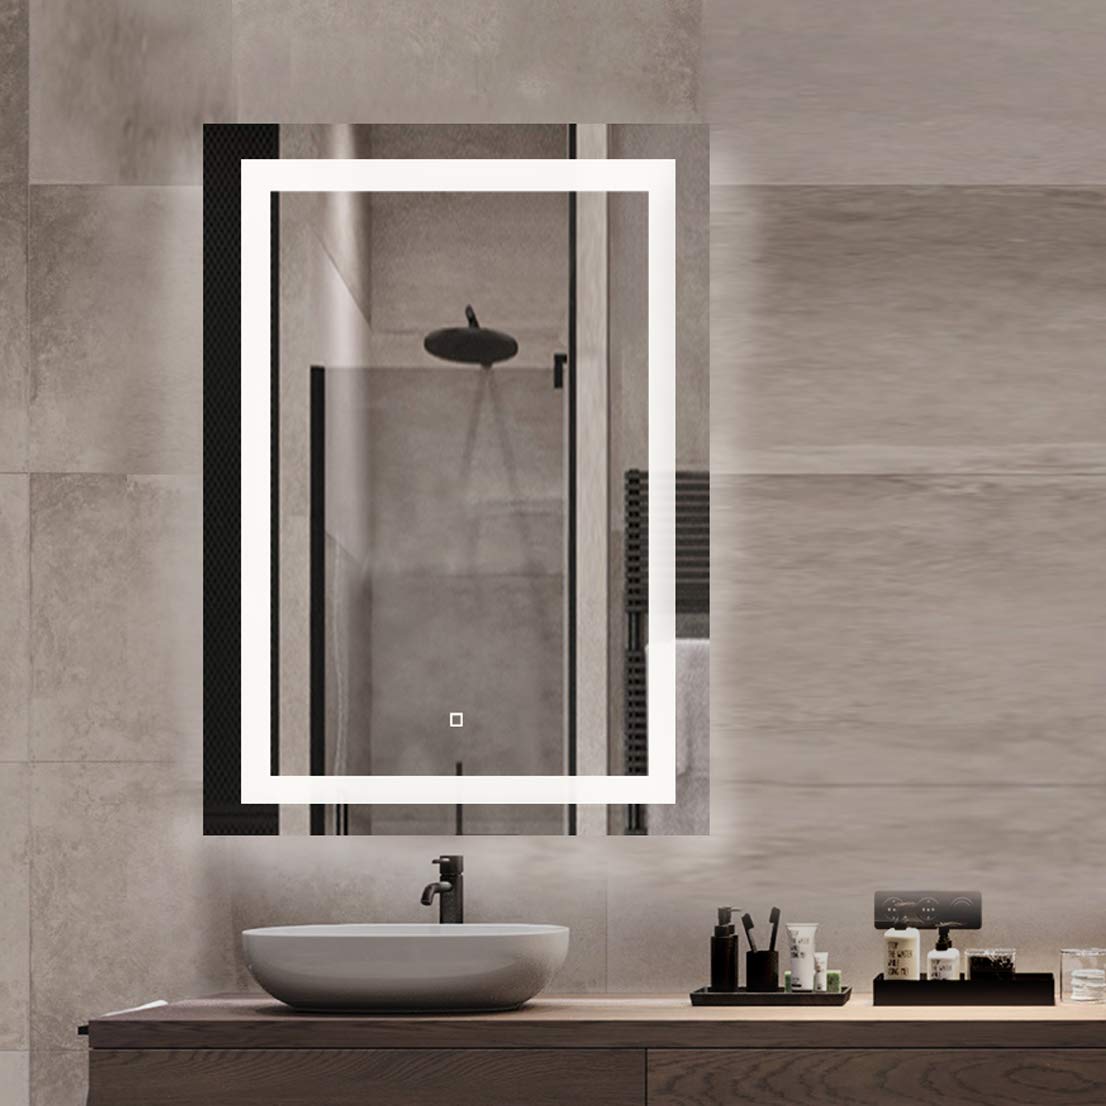 MAIHAUZ 24x36Inch LED Lighted Bathroom Mirror Wall Mounted Dimmer Touch Switch IP44 Waterproof 6500K Cool White CRI>90 Vertical& Horizontal(ALVA 24...